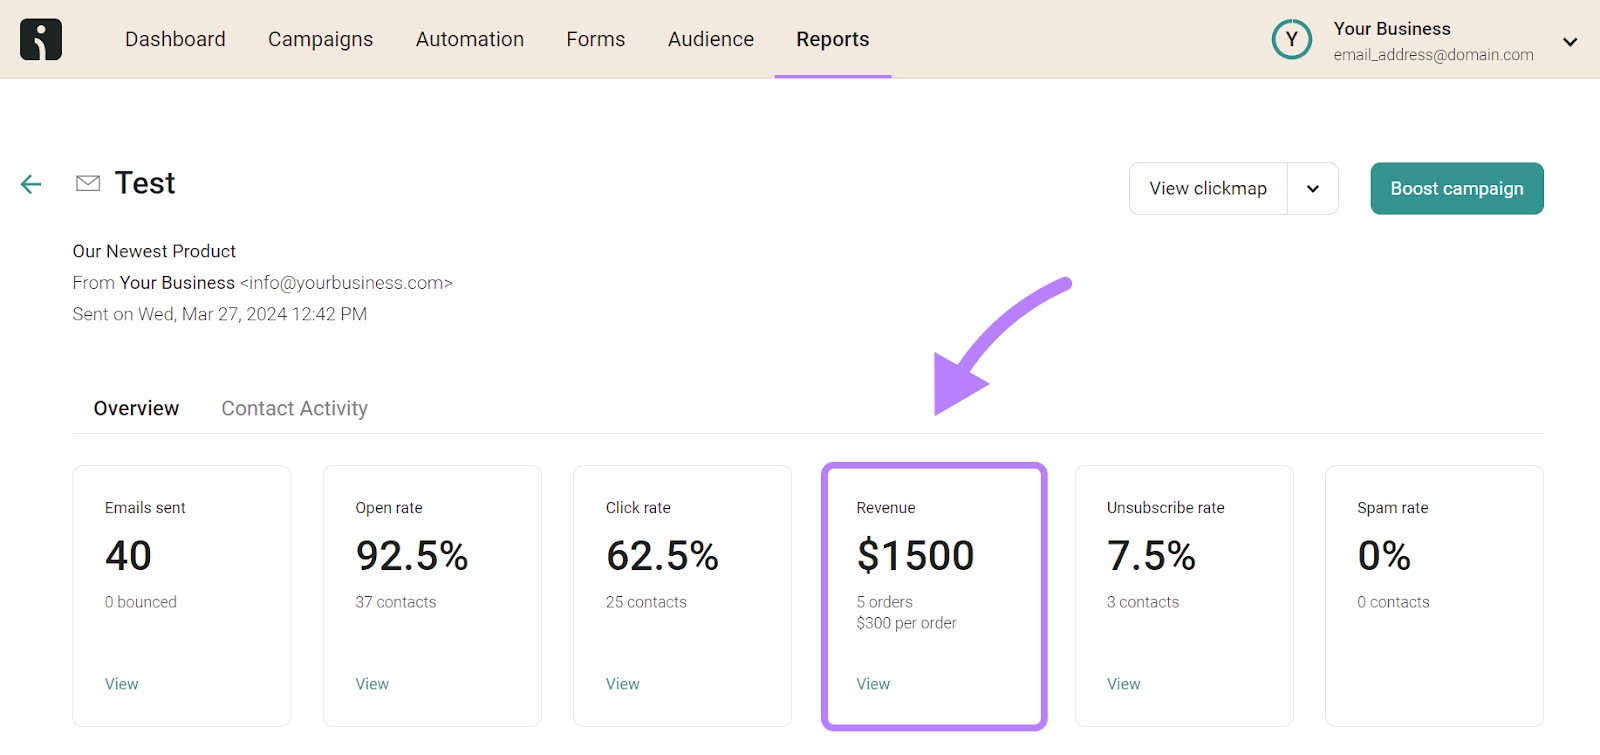 Email campaign overview in Omnisend, with "Revenue" metric highlighted